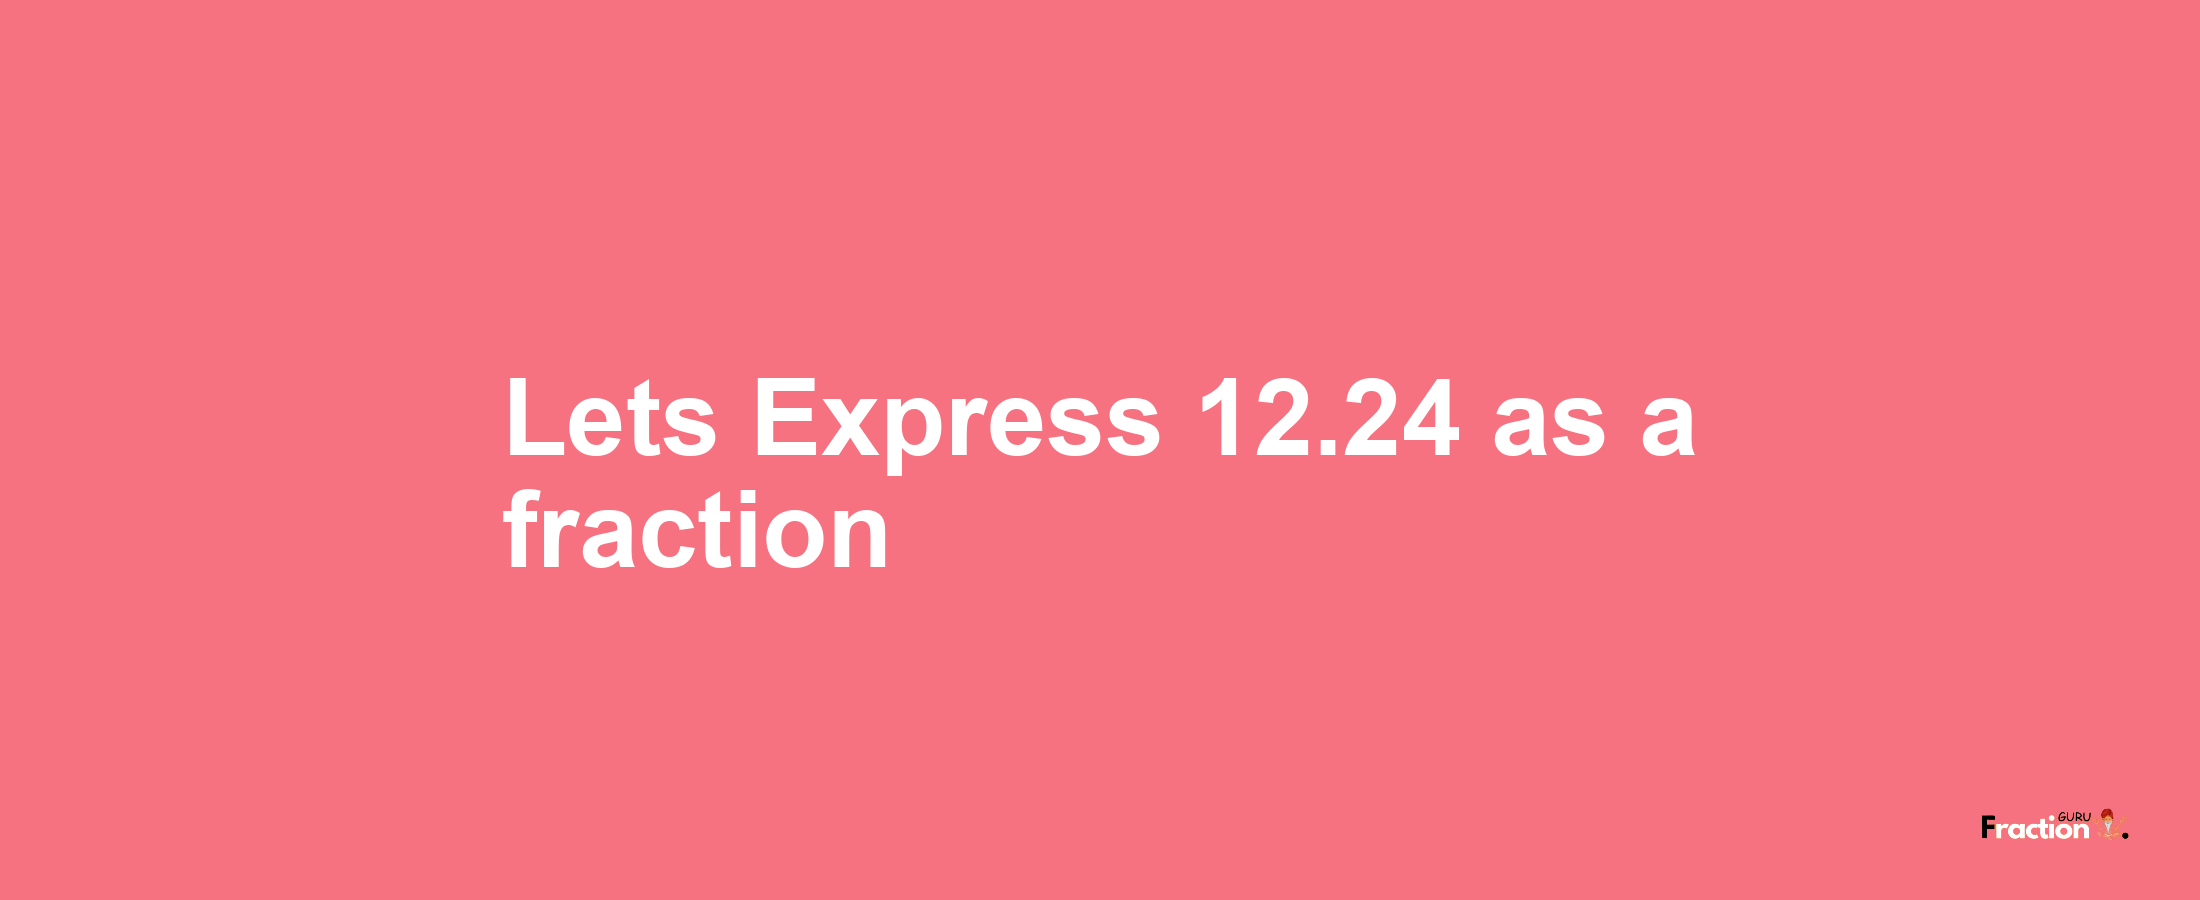 Lets Express 12.24 as afraction